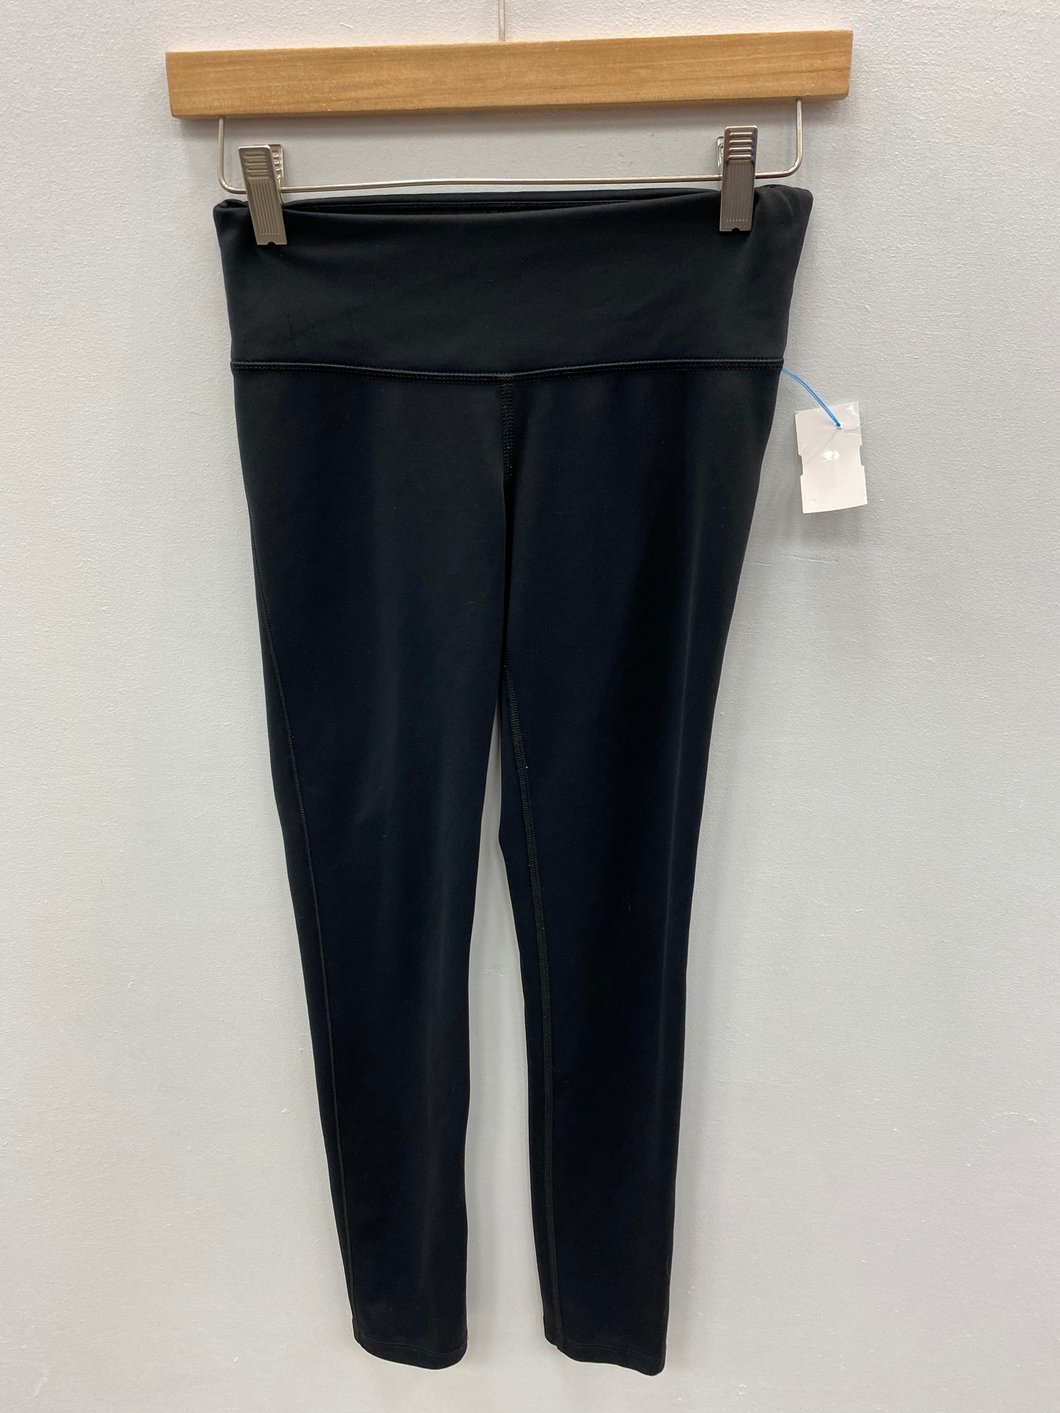 New Balance Athletic Pants Size Extra Small